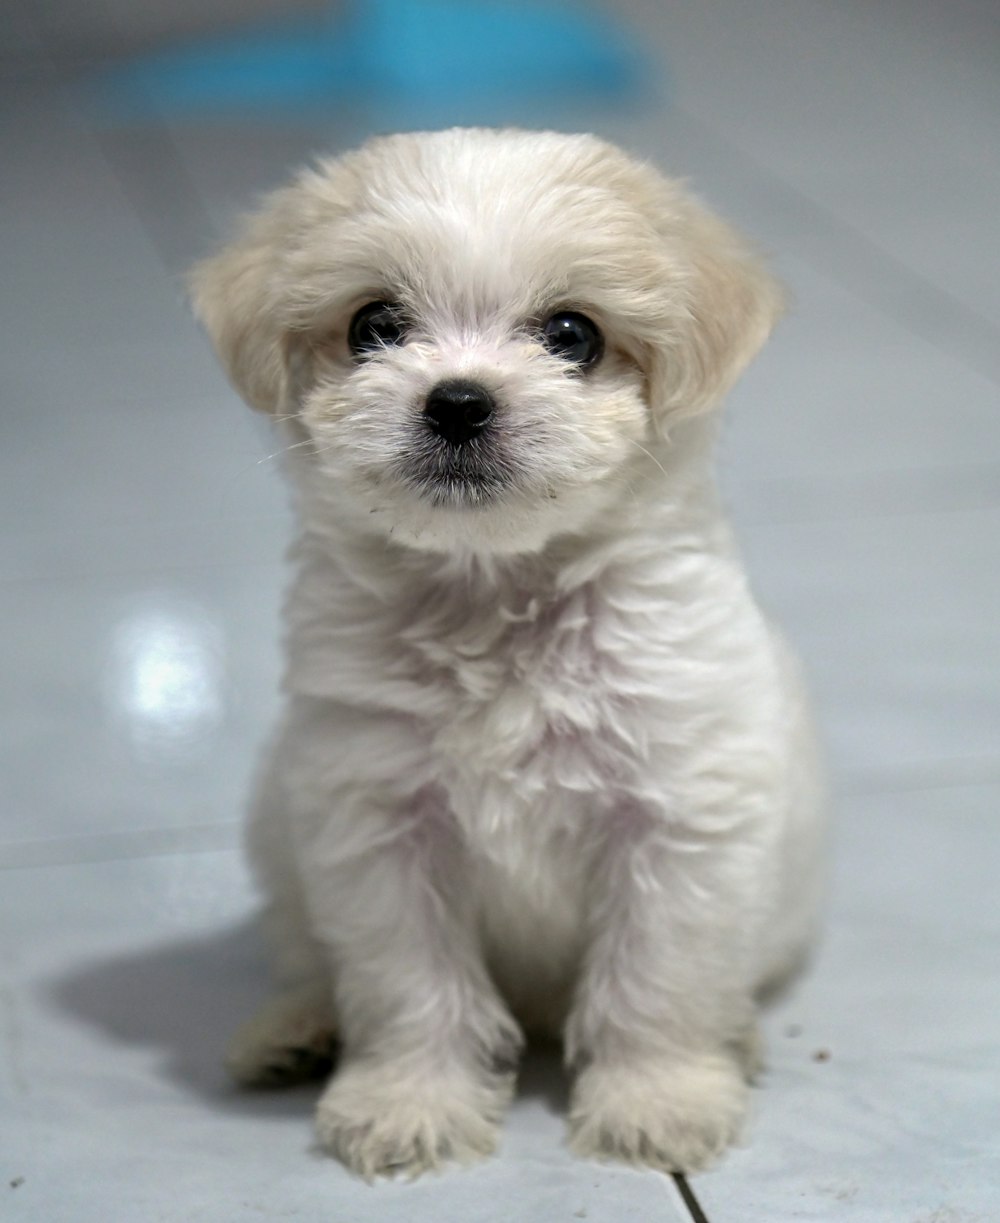 a small white dog sitting on top of a tile floor